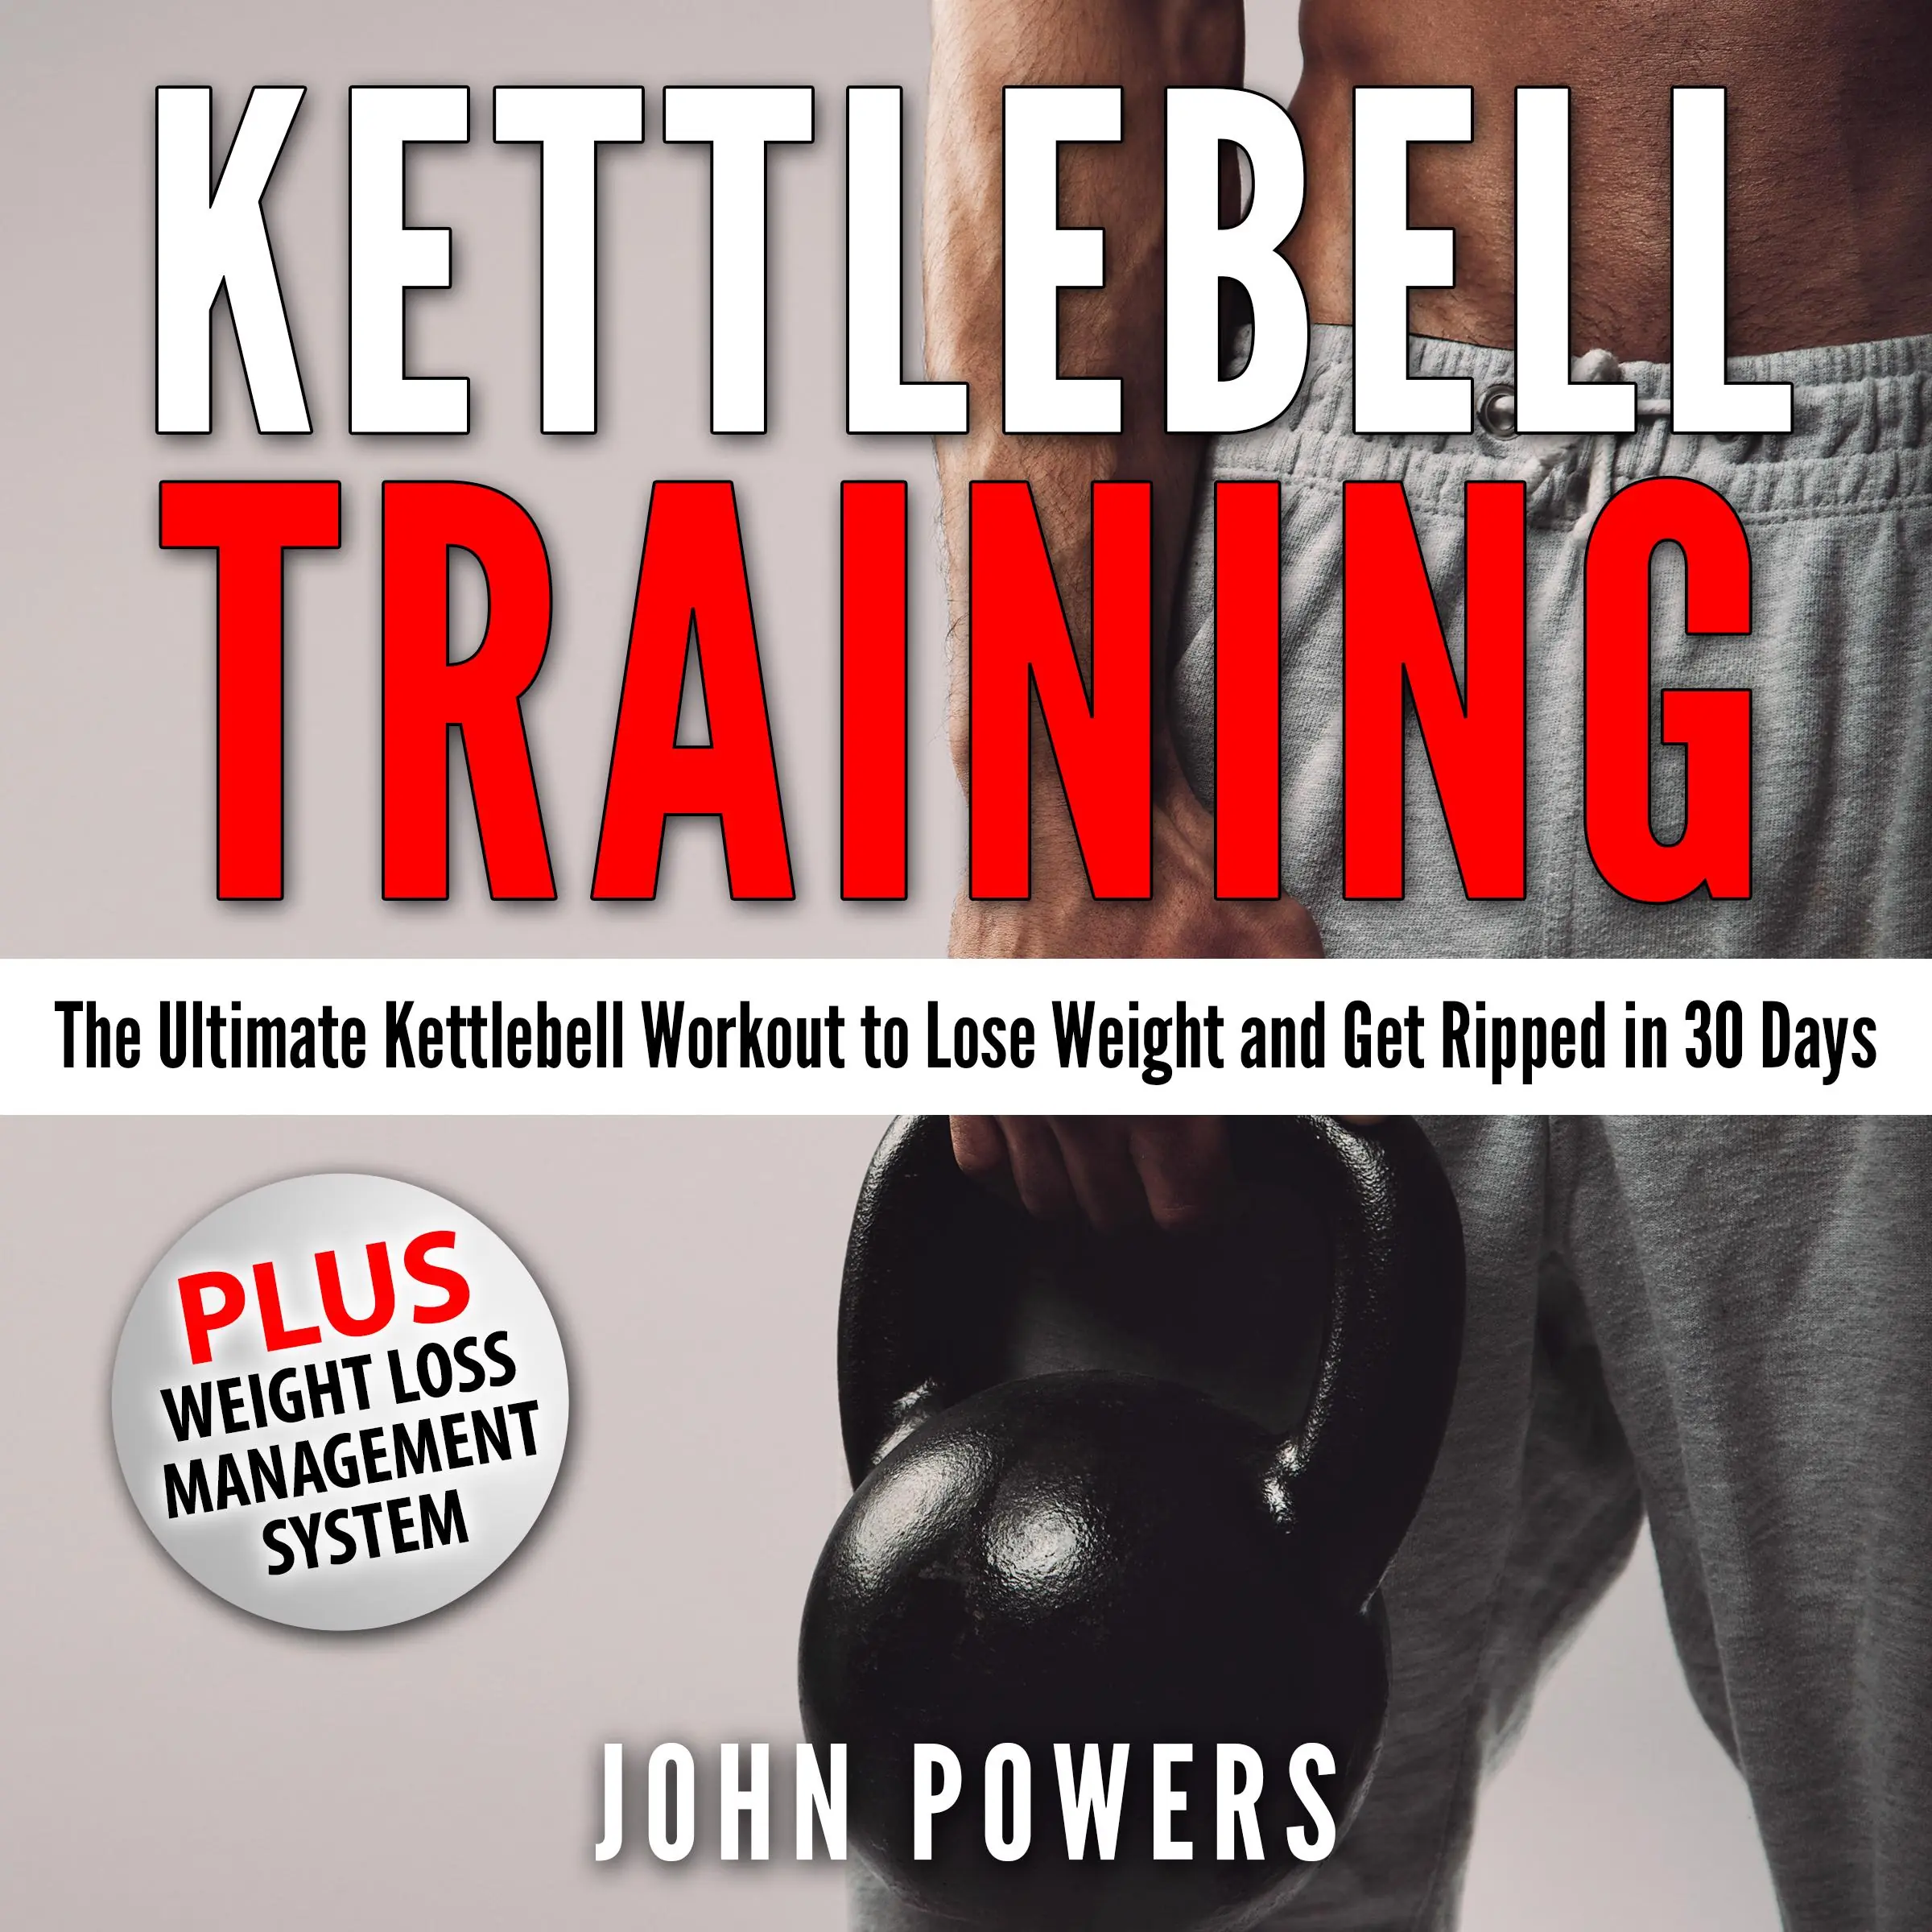 Kettlebell Training: The Ultimate Kettlebell Workout to Lose Weight and Get Ripped in 30 Days Audiobook by John Powers